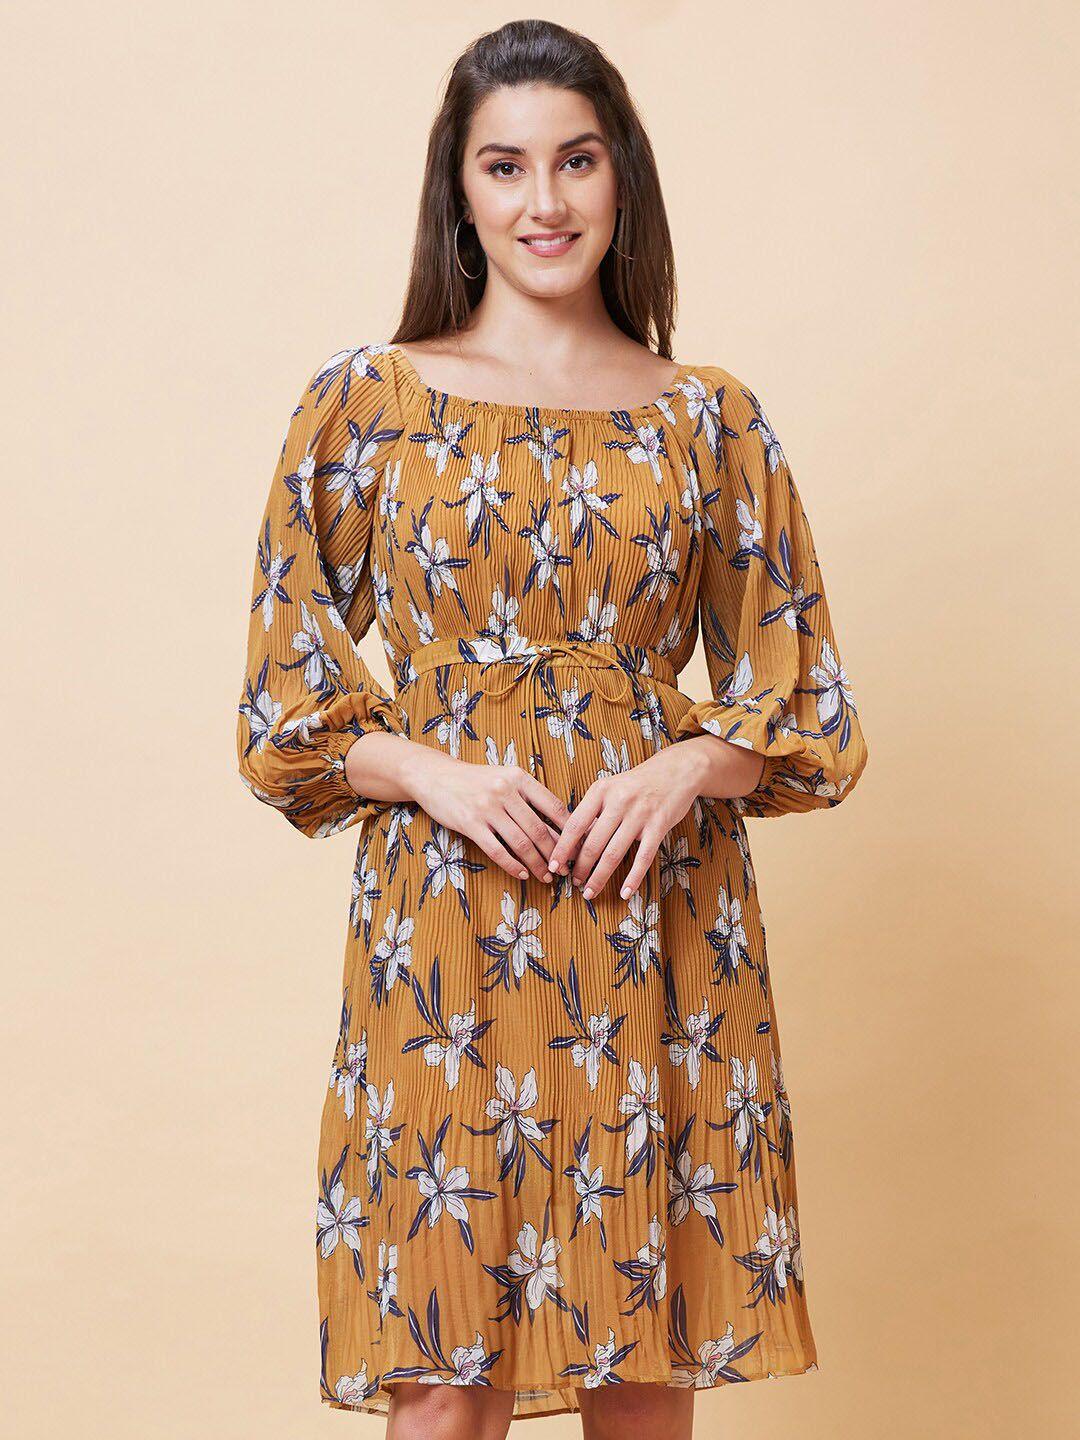 globus mustard yellow & white floral printed accordion pleated puff sleeve a-line dress